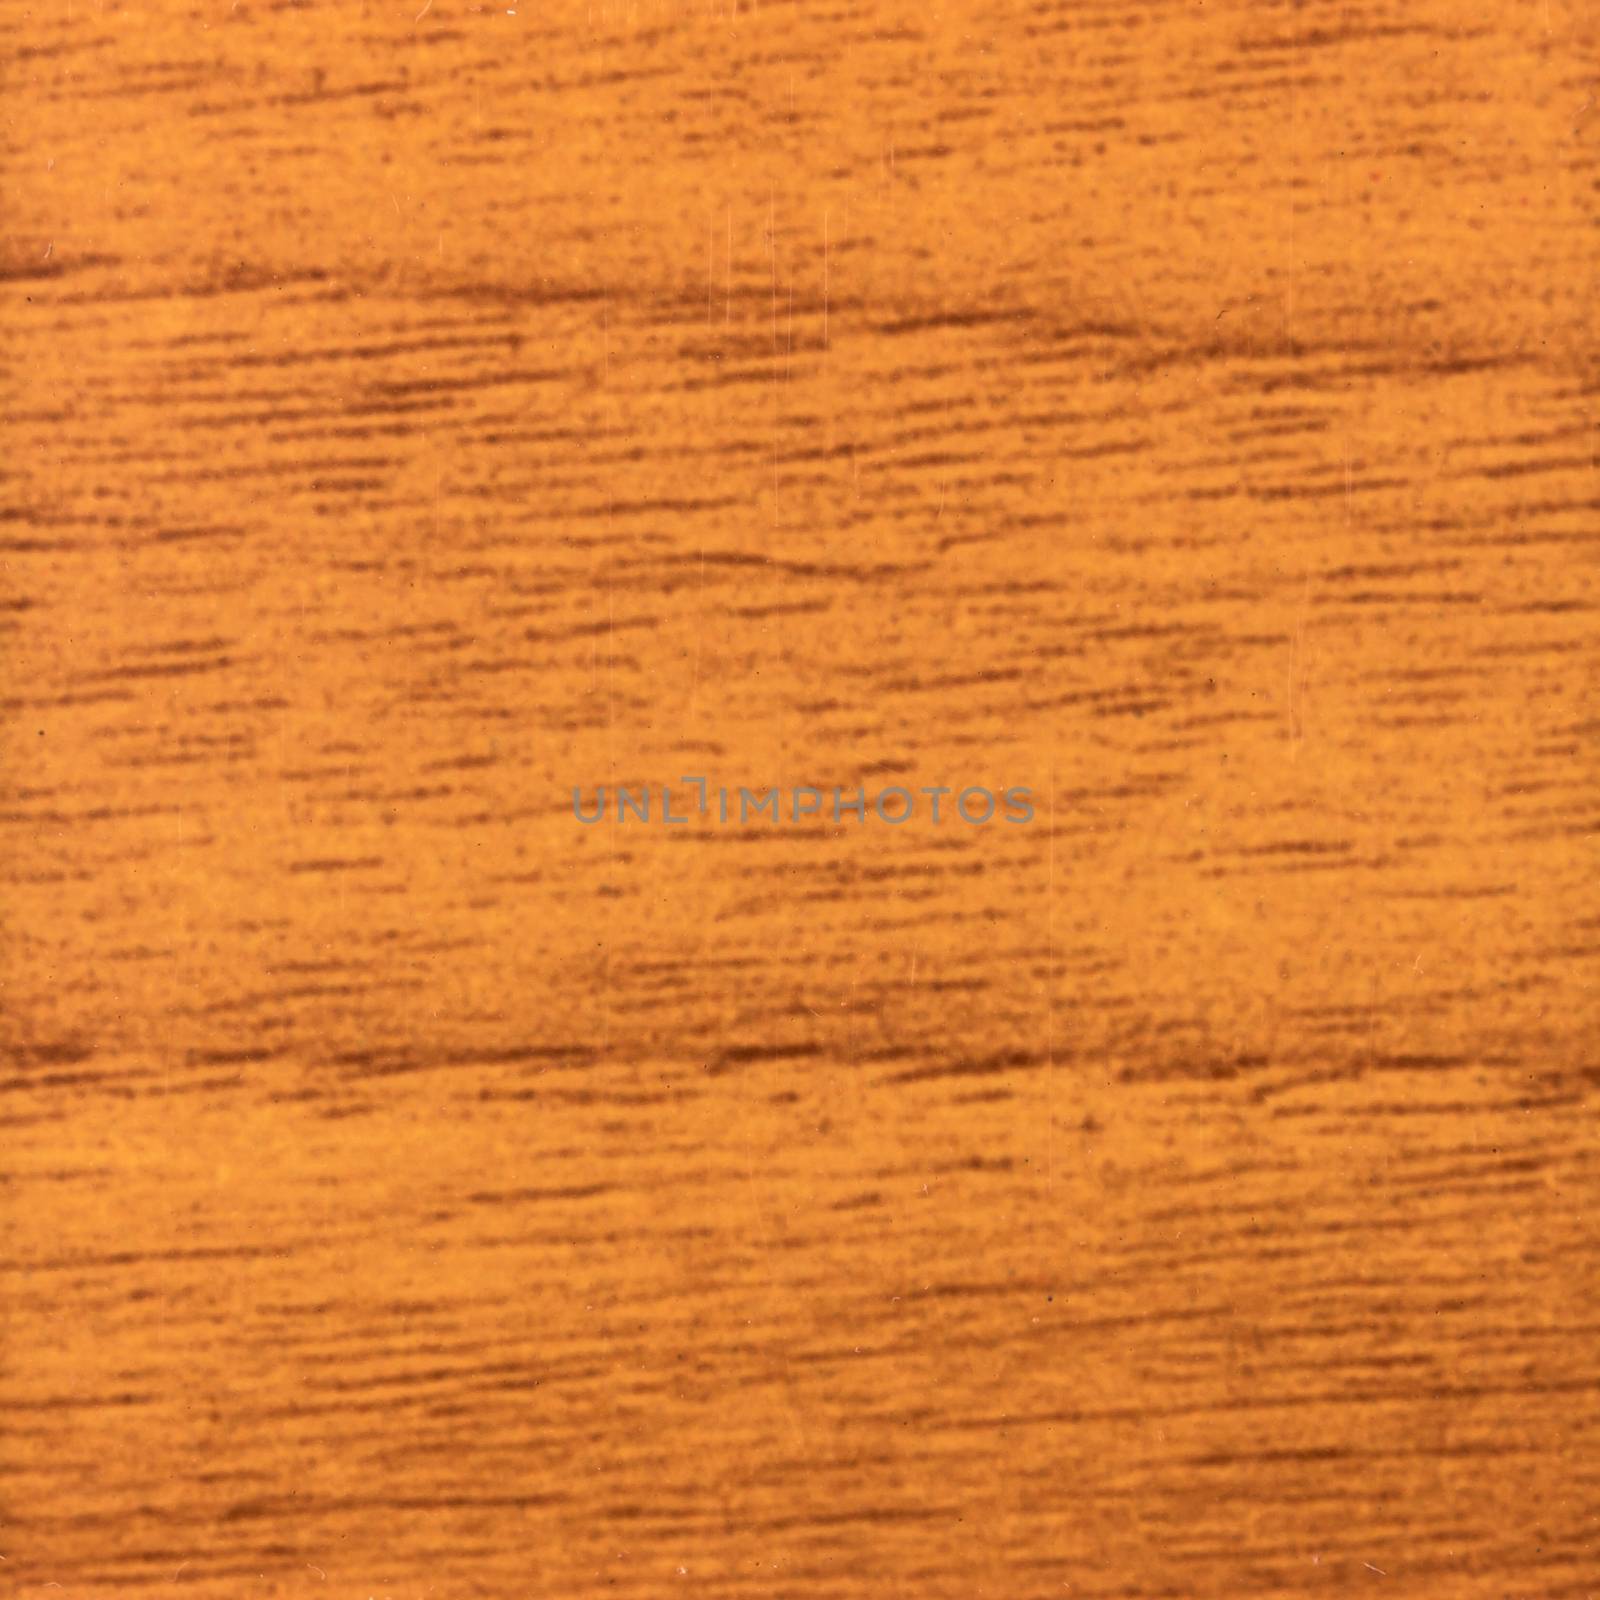 Abstract wood texture with focus on the wood's grain. Acacia woo by AnaMarques